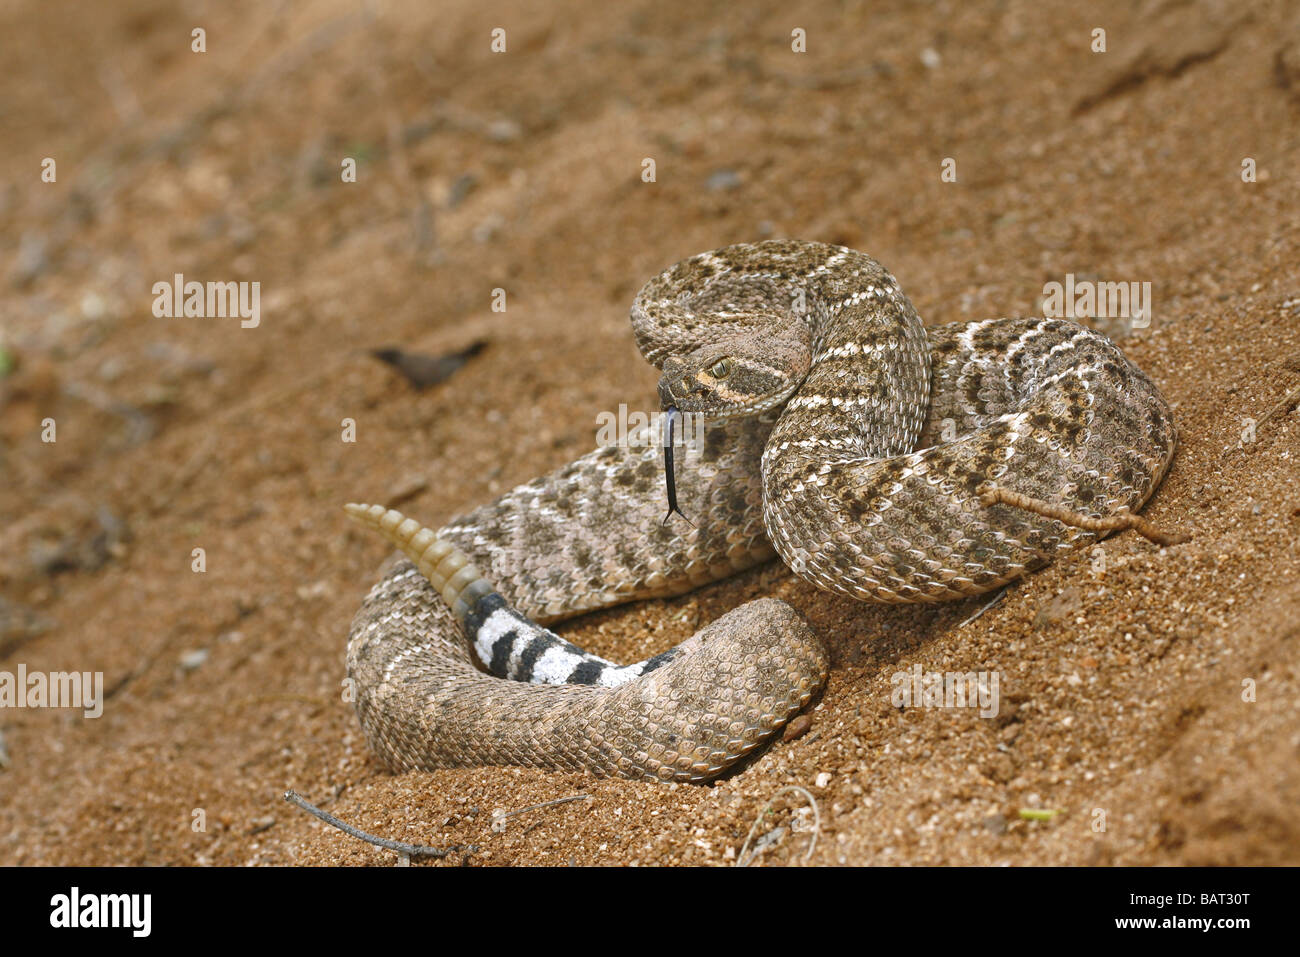 When it feels threatened, the Western Diamondback Rattlesnake coils up and shakes its tail producing a unique ratlling sound. Stock Photo